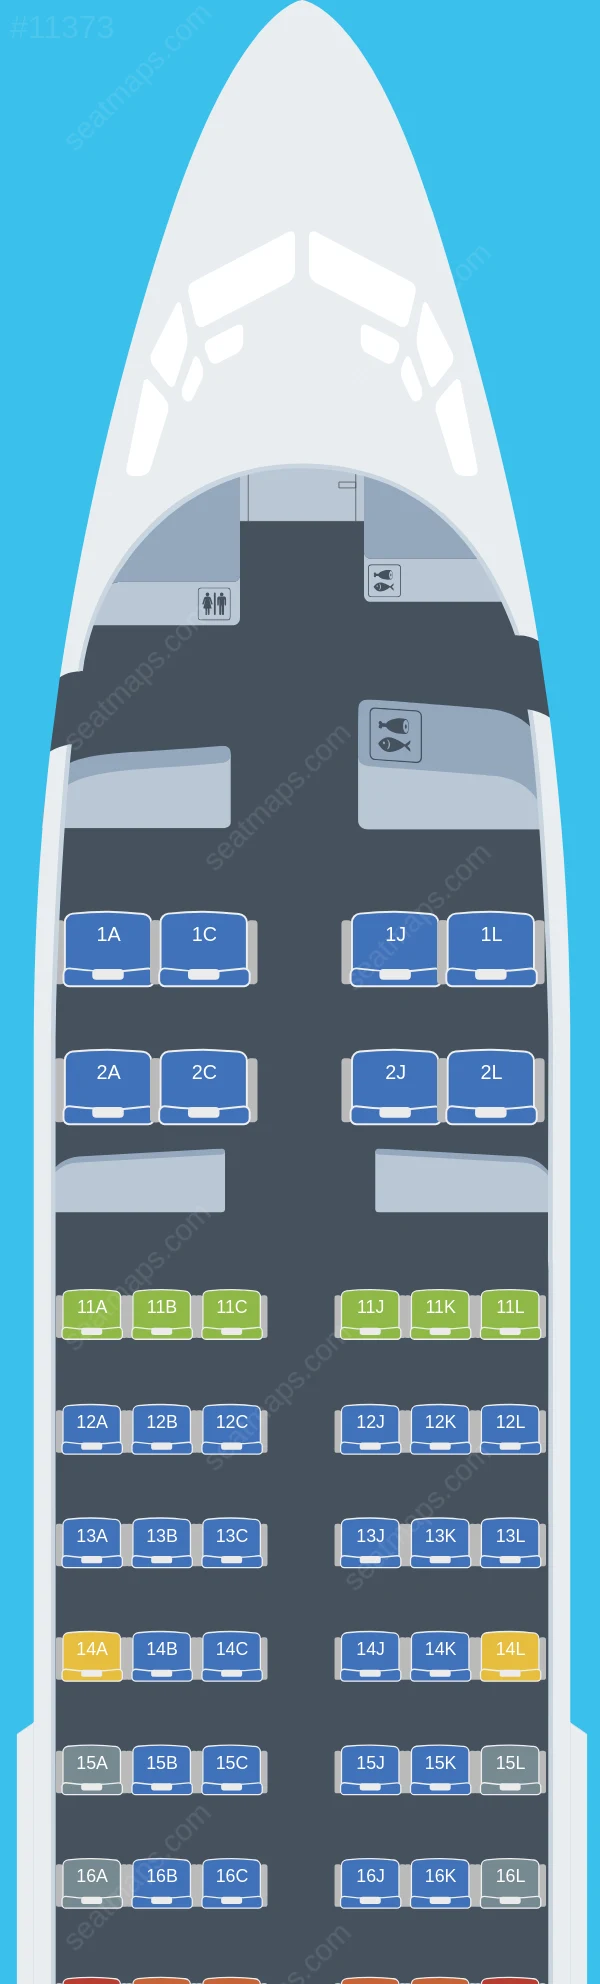 Air China Inner Mongolia Boeing 737-700 seatmap preview